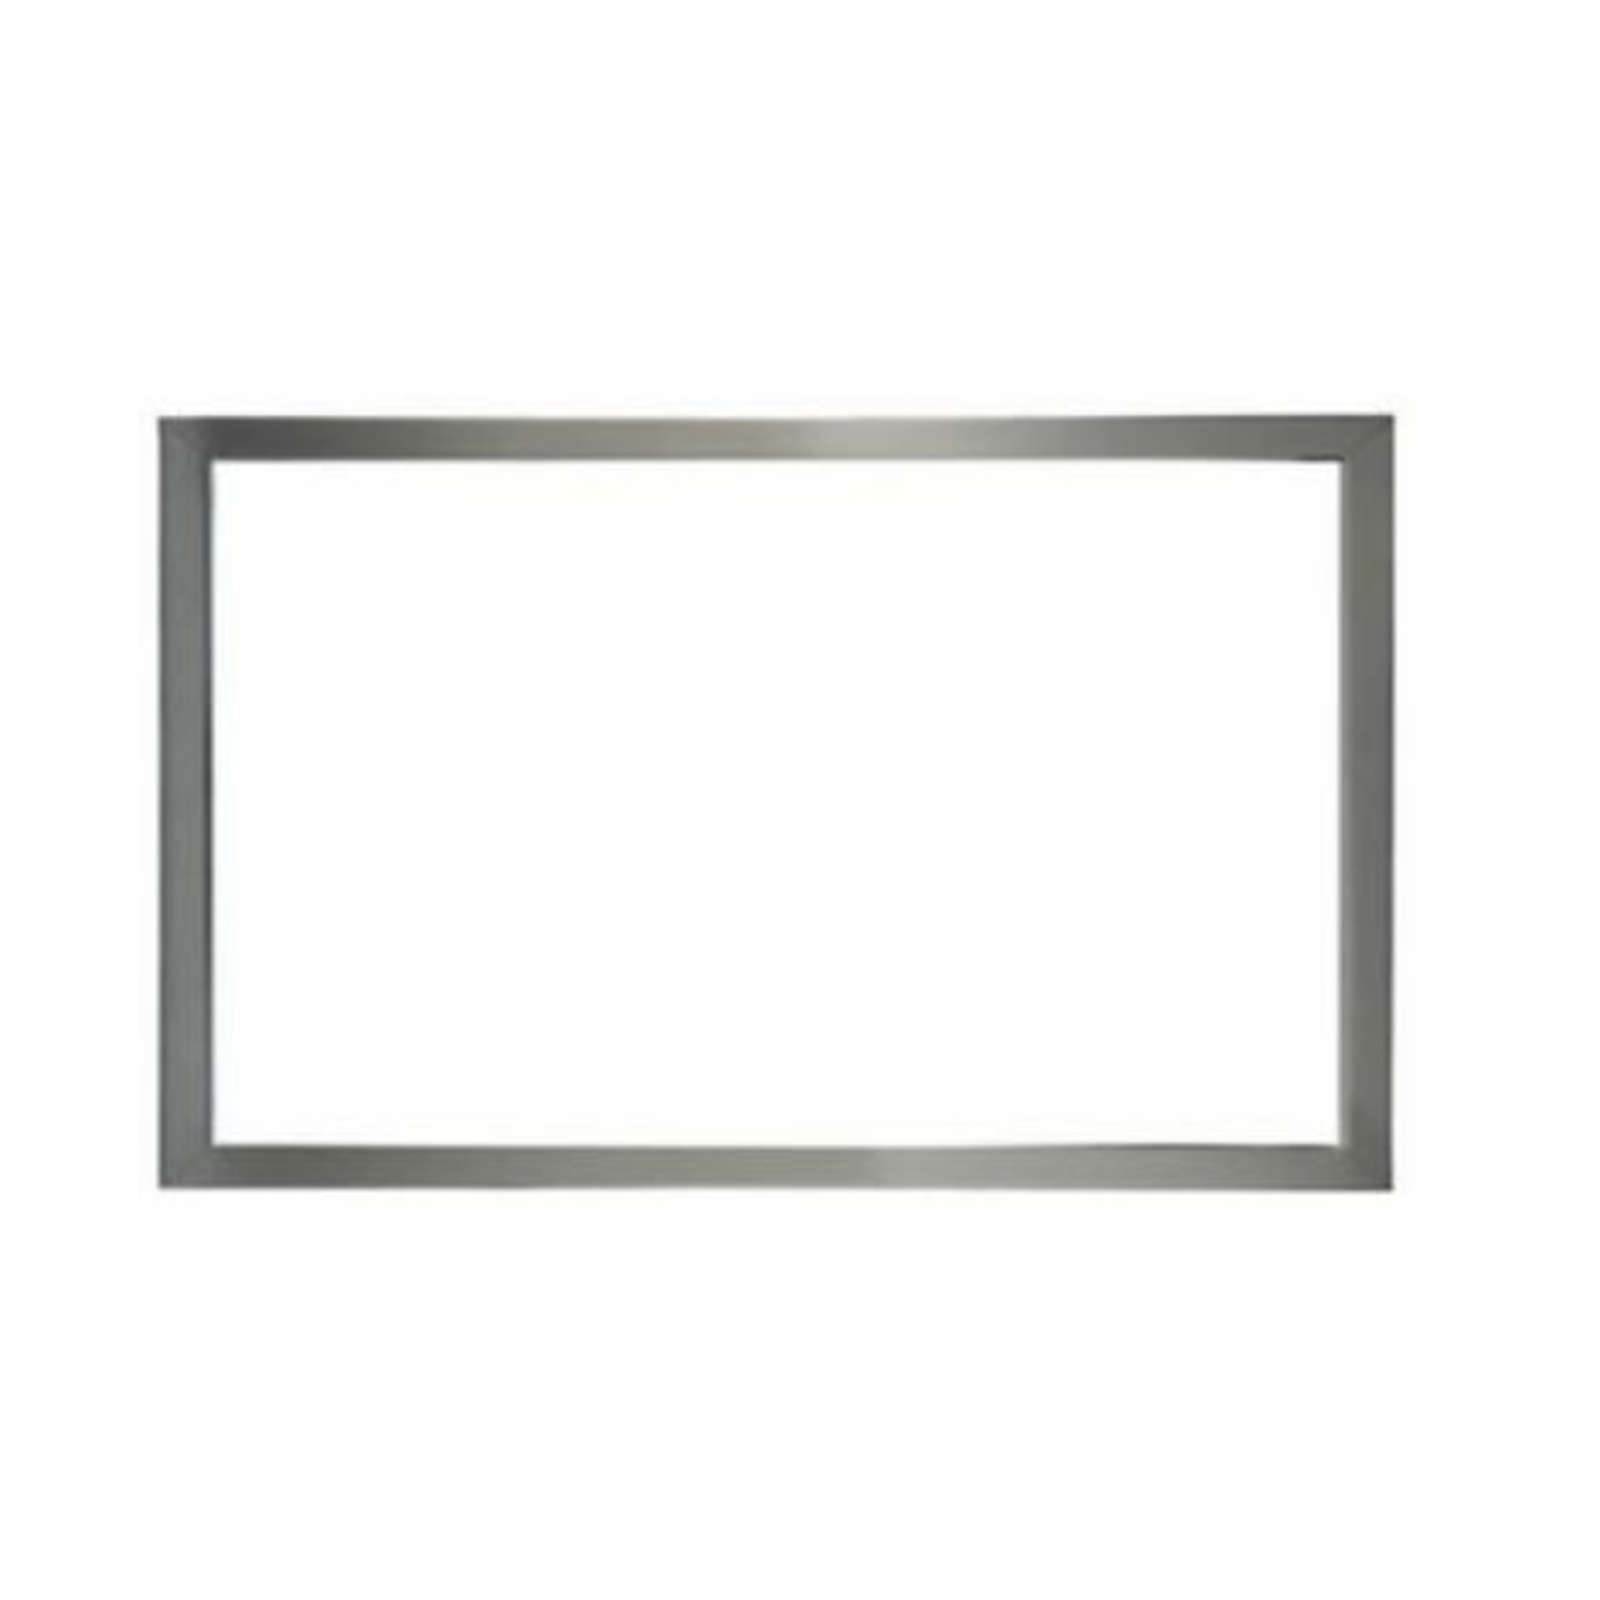 Empire 1.5-in Oil-Rubbed Bronze Beveled Frame - DF402BZT